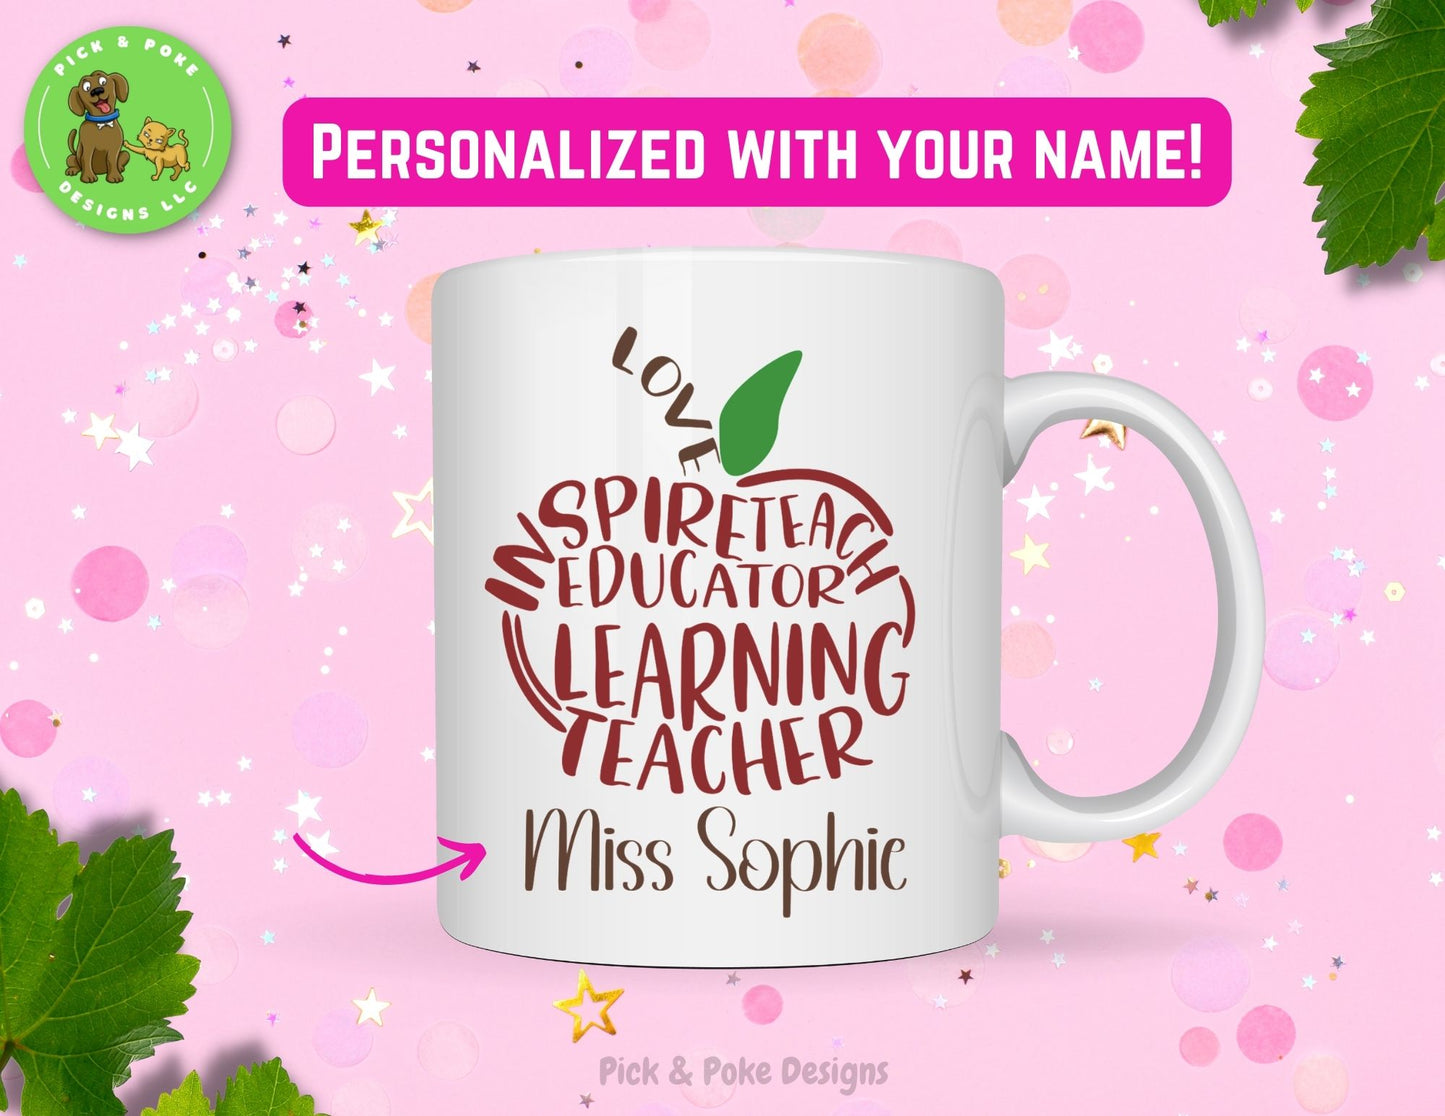 Teacher coffee cup is personalized with your name in a hand lettering font